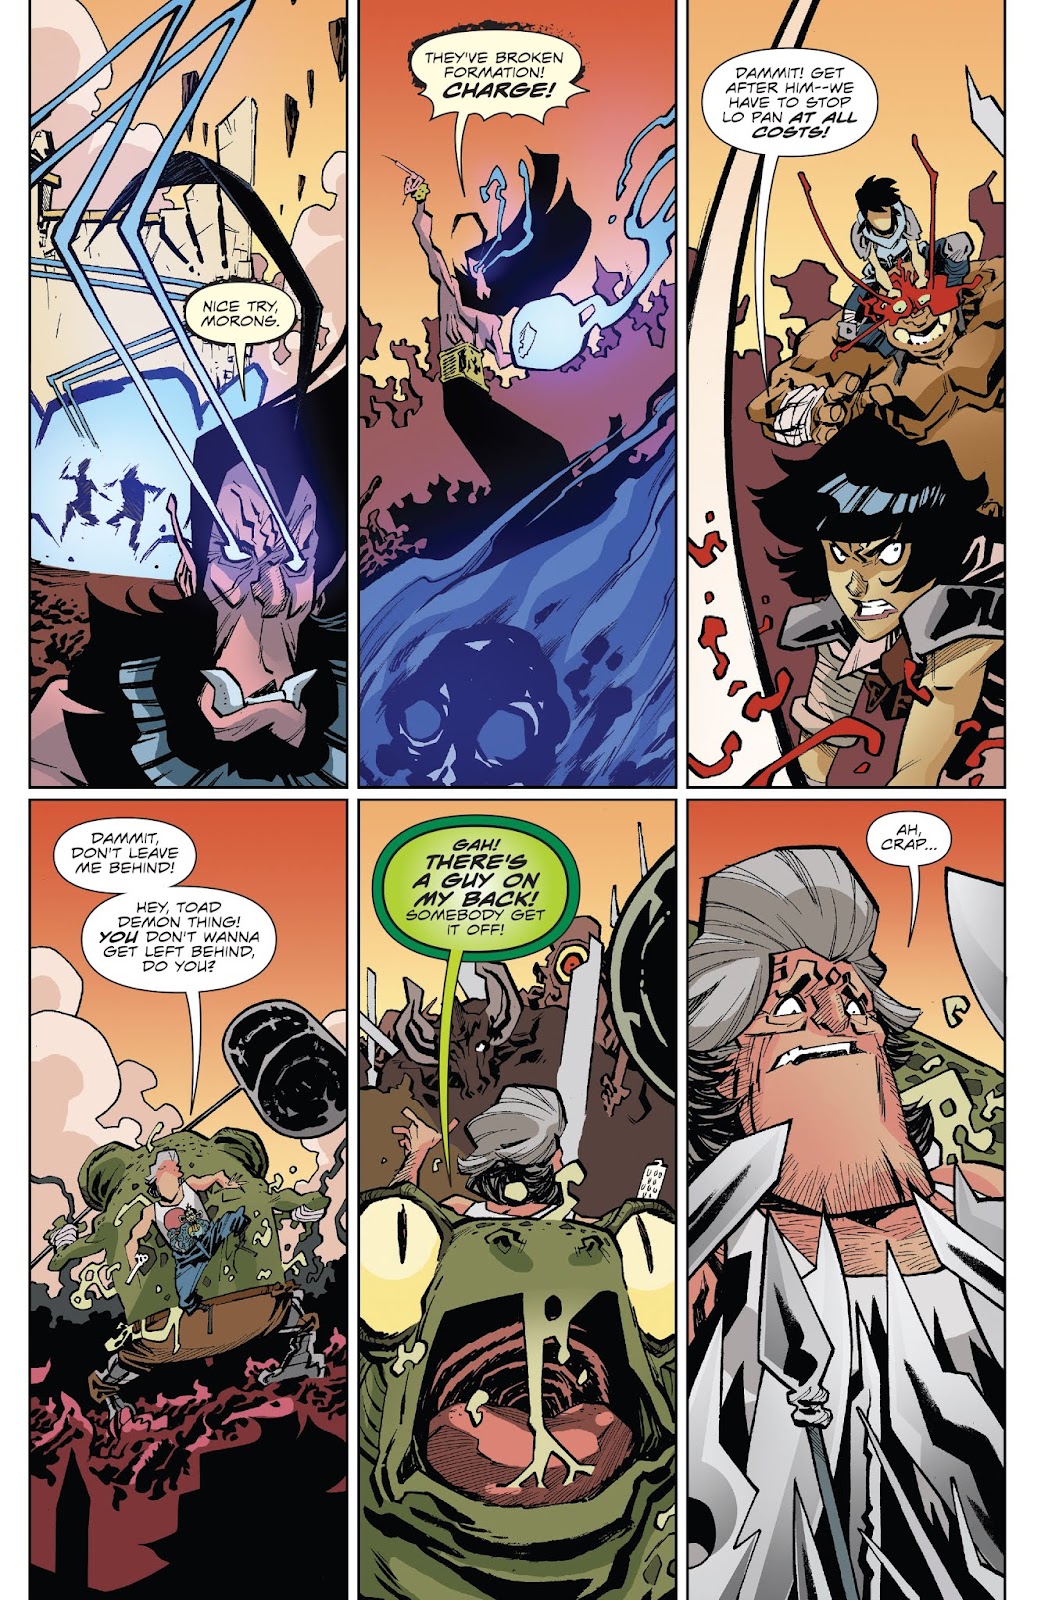 Big Trouble in Little China: Old Man Jack issue 12 - Page 6